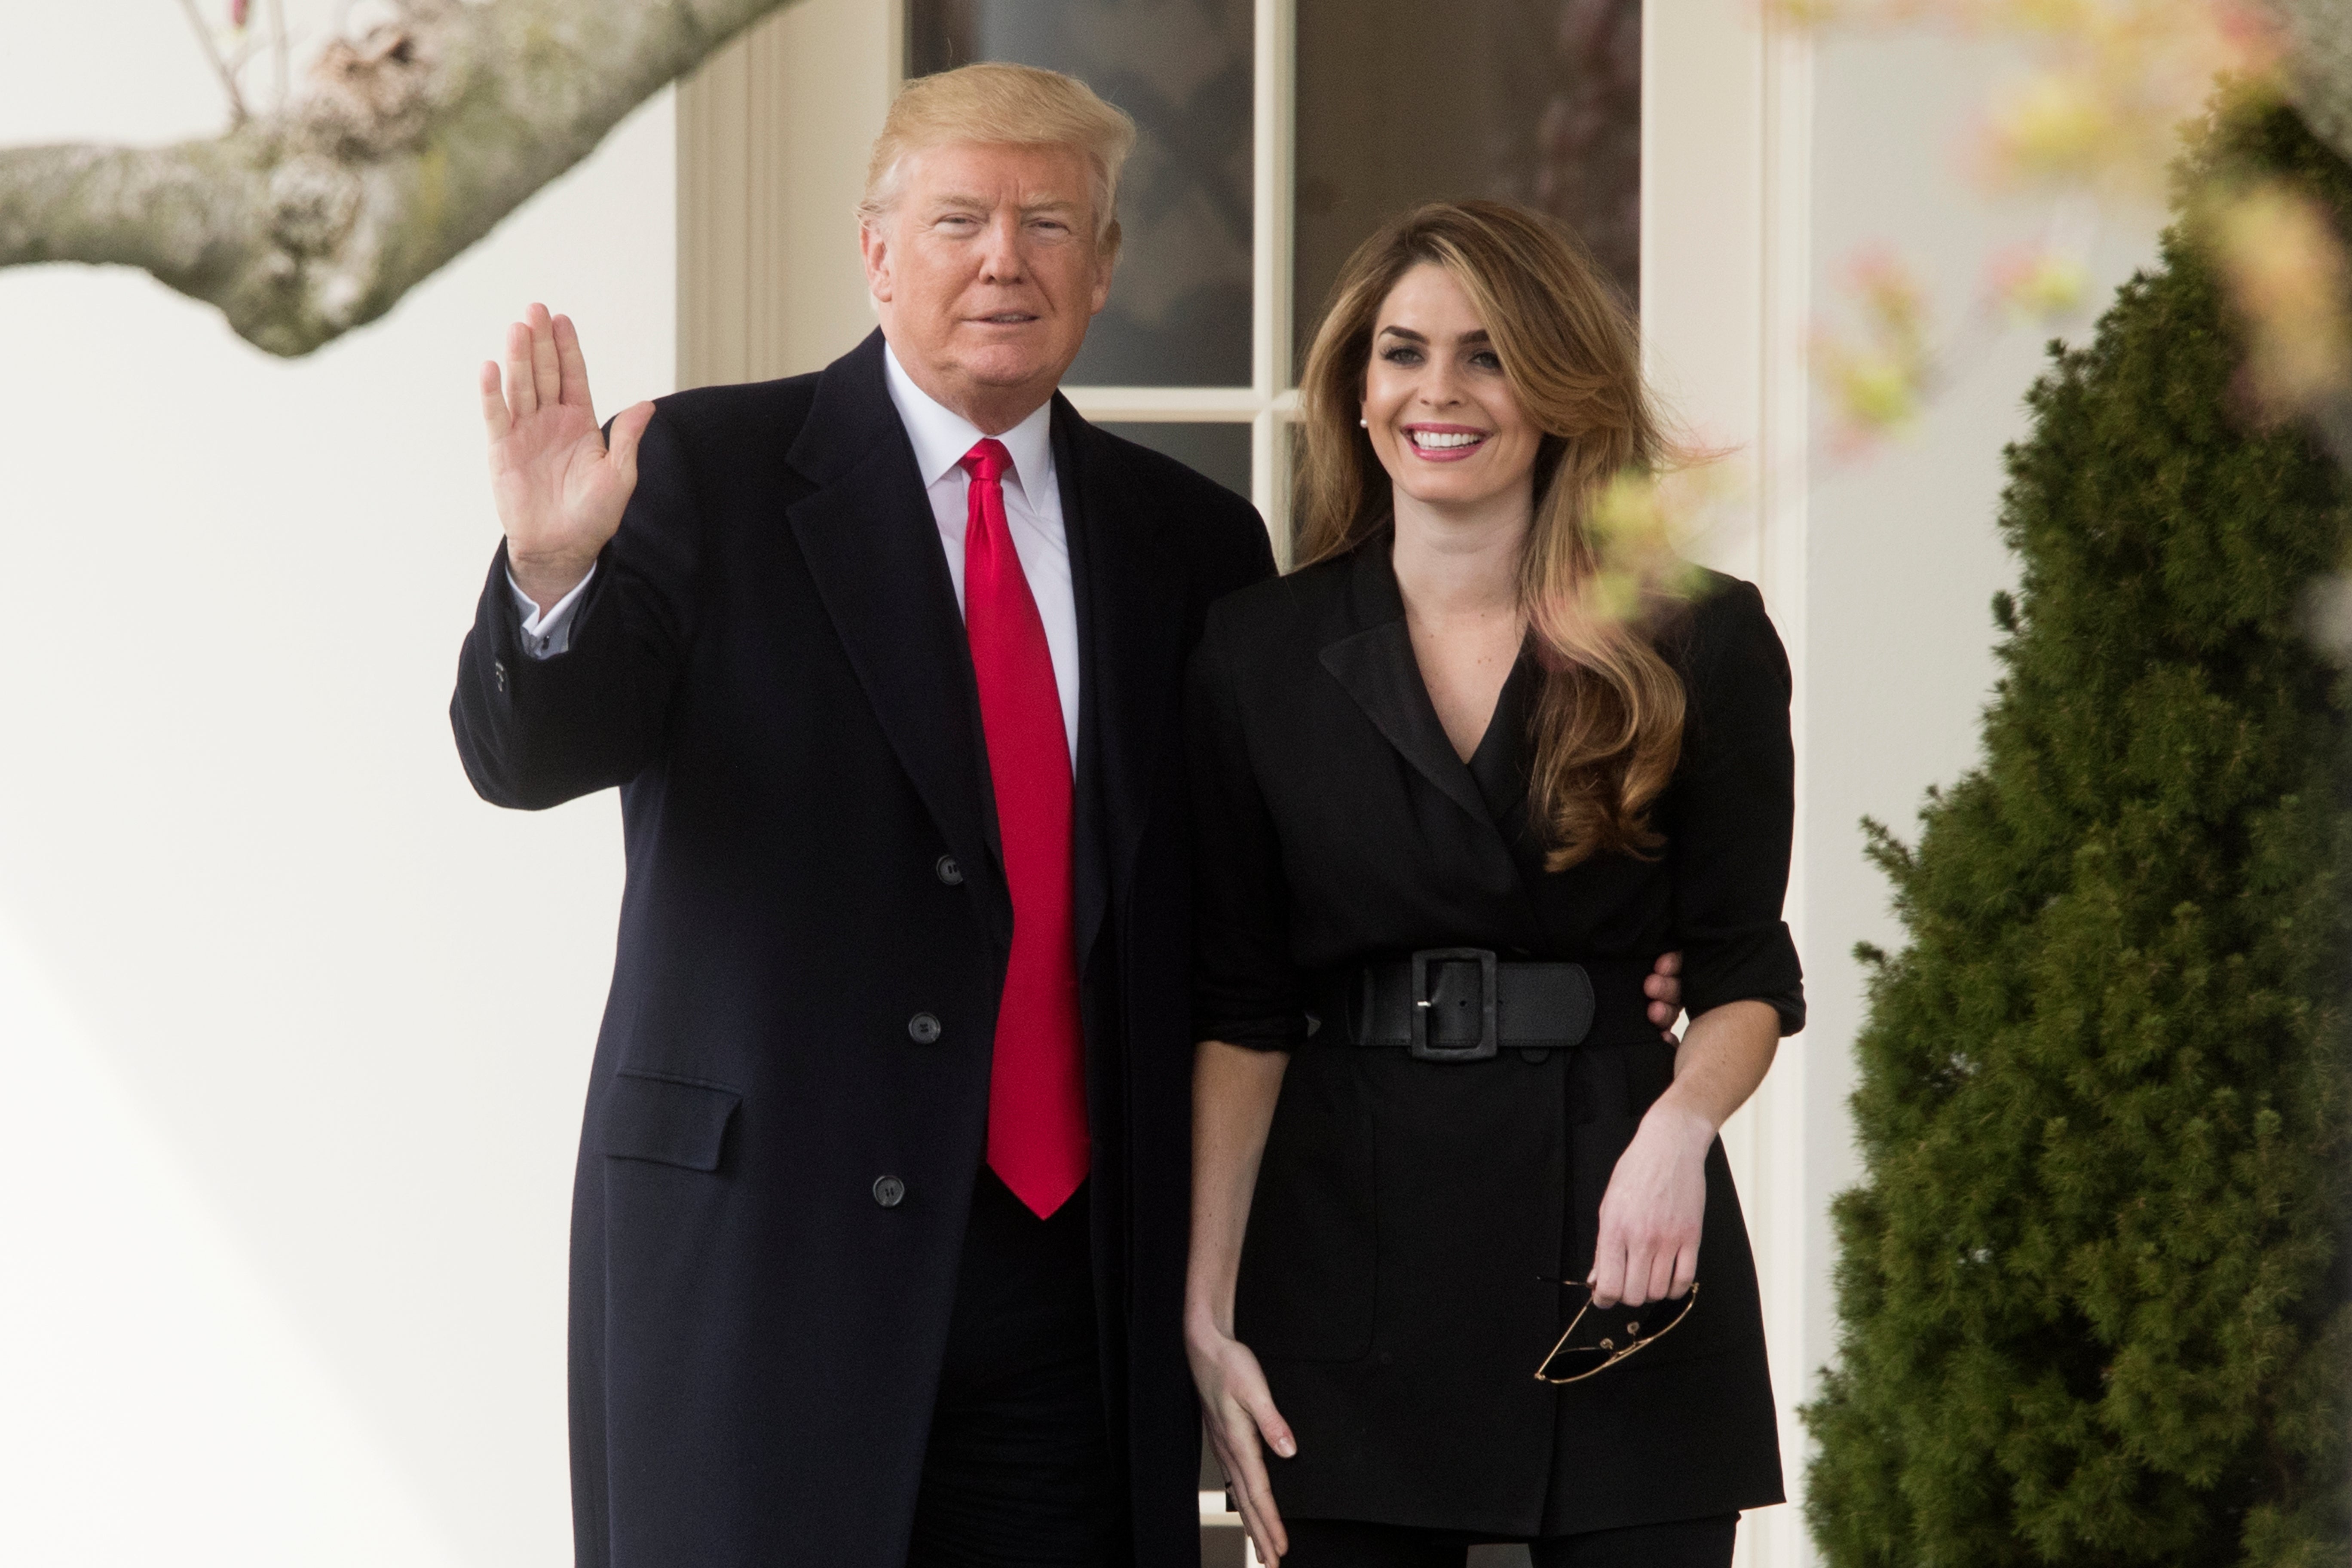 Donald Trump and Hope Hicks at the White House on 2 October 2020